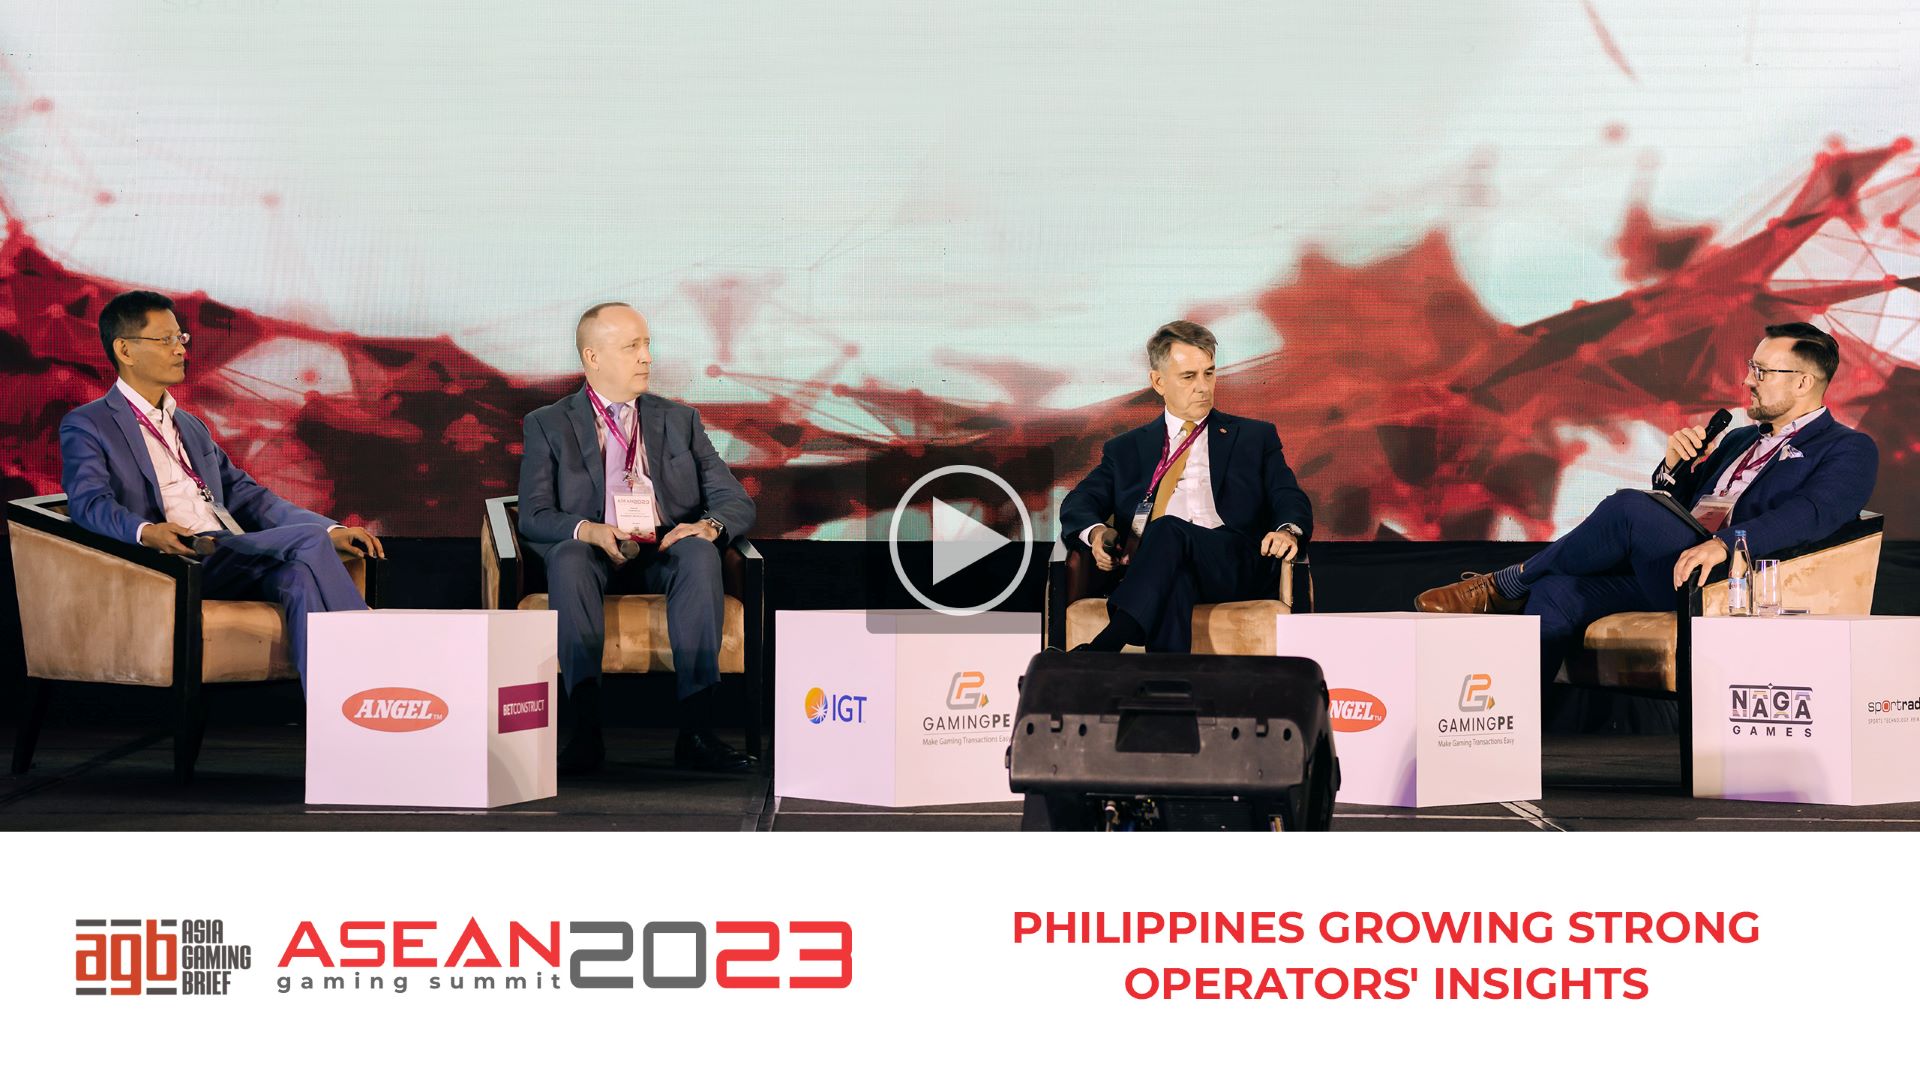 Philippines, eyeing $10 billion in GGR, competition driving revival, asia gaming ebrief